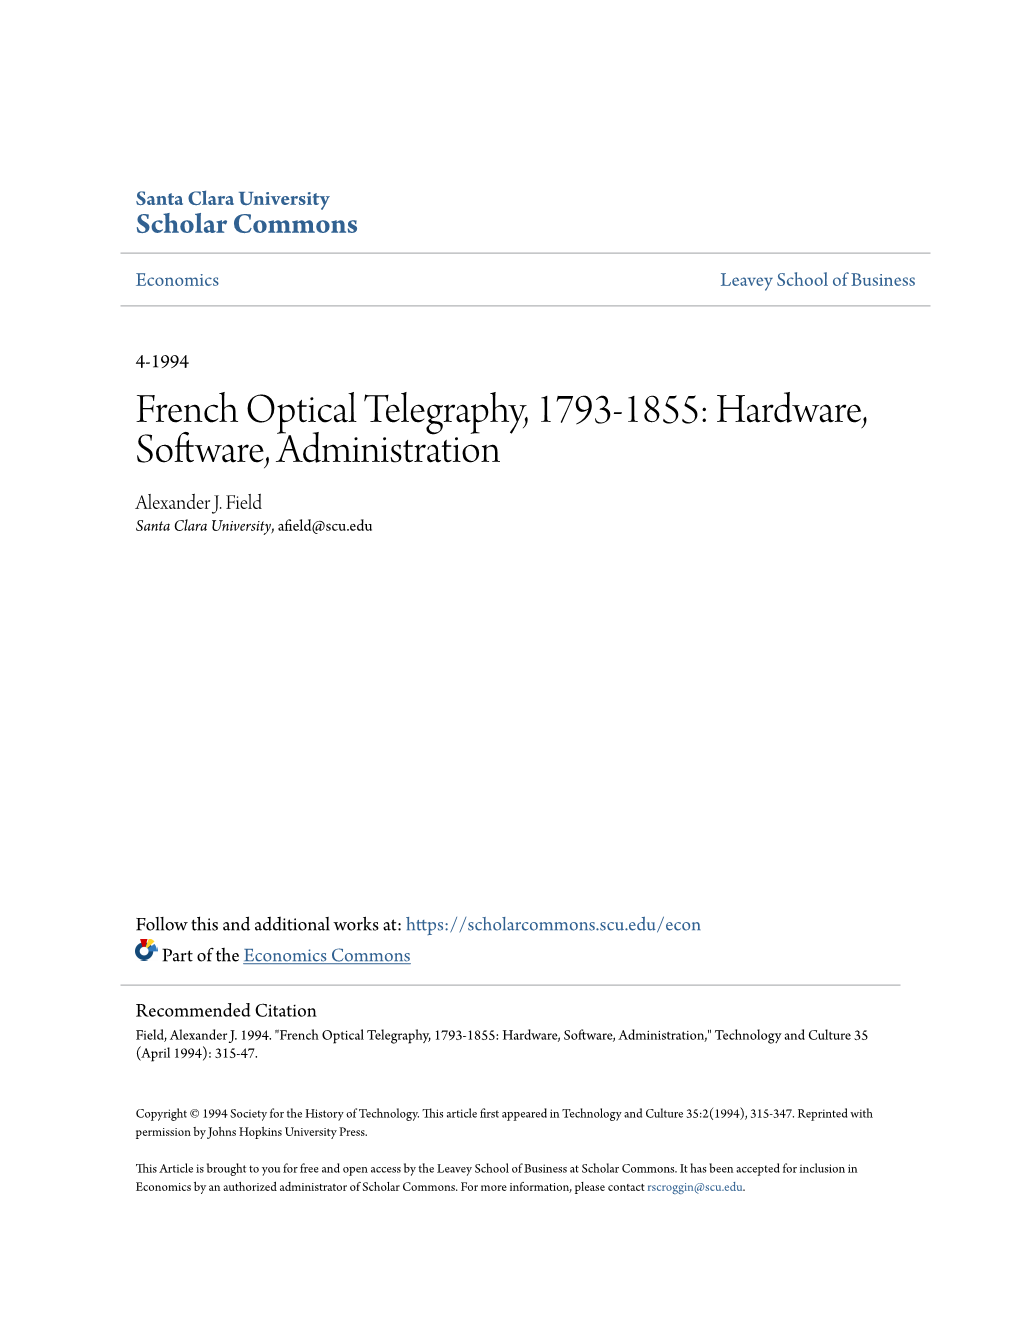 French Optical Telegraphy, 1793-1855: Hardware, Software, Administration Alexander J